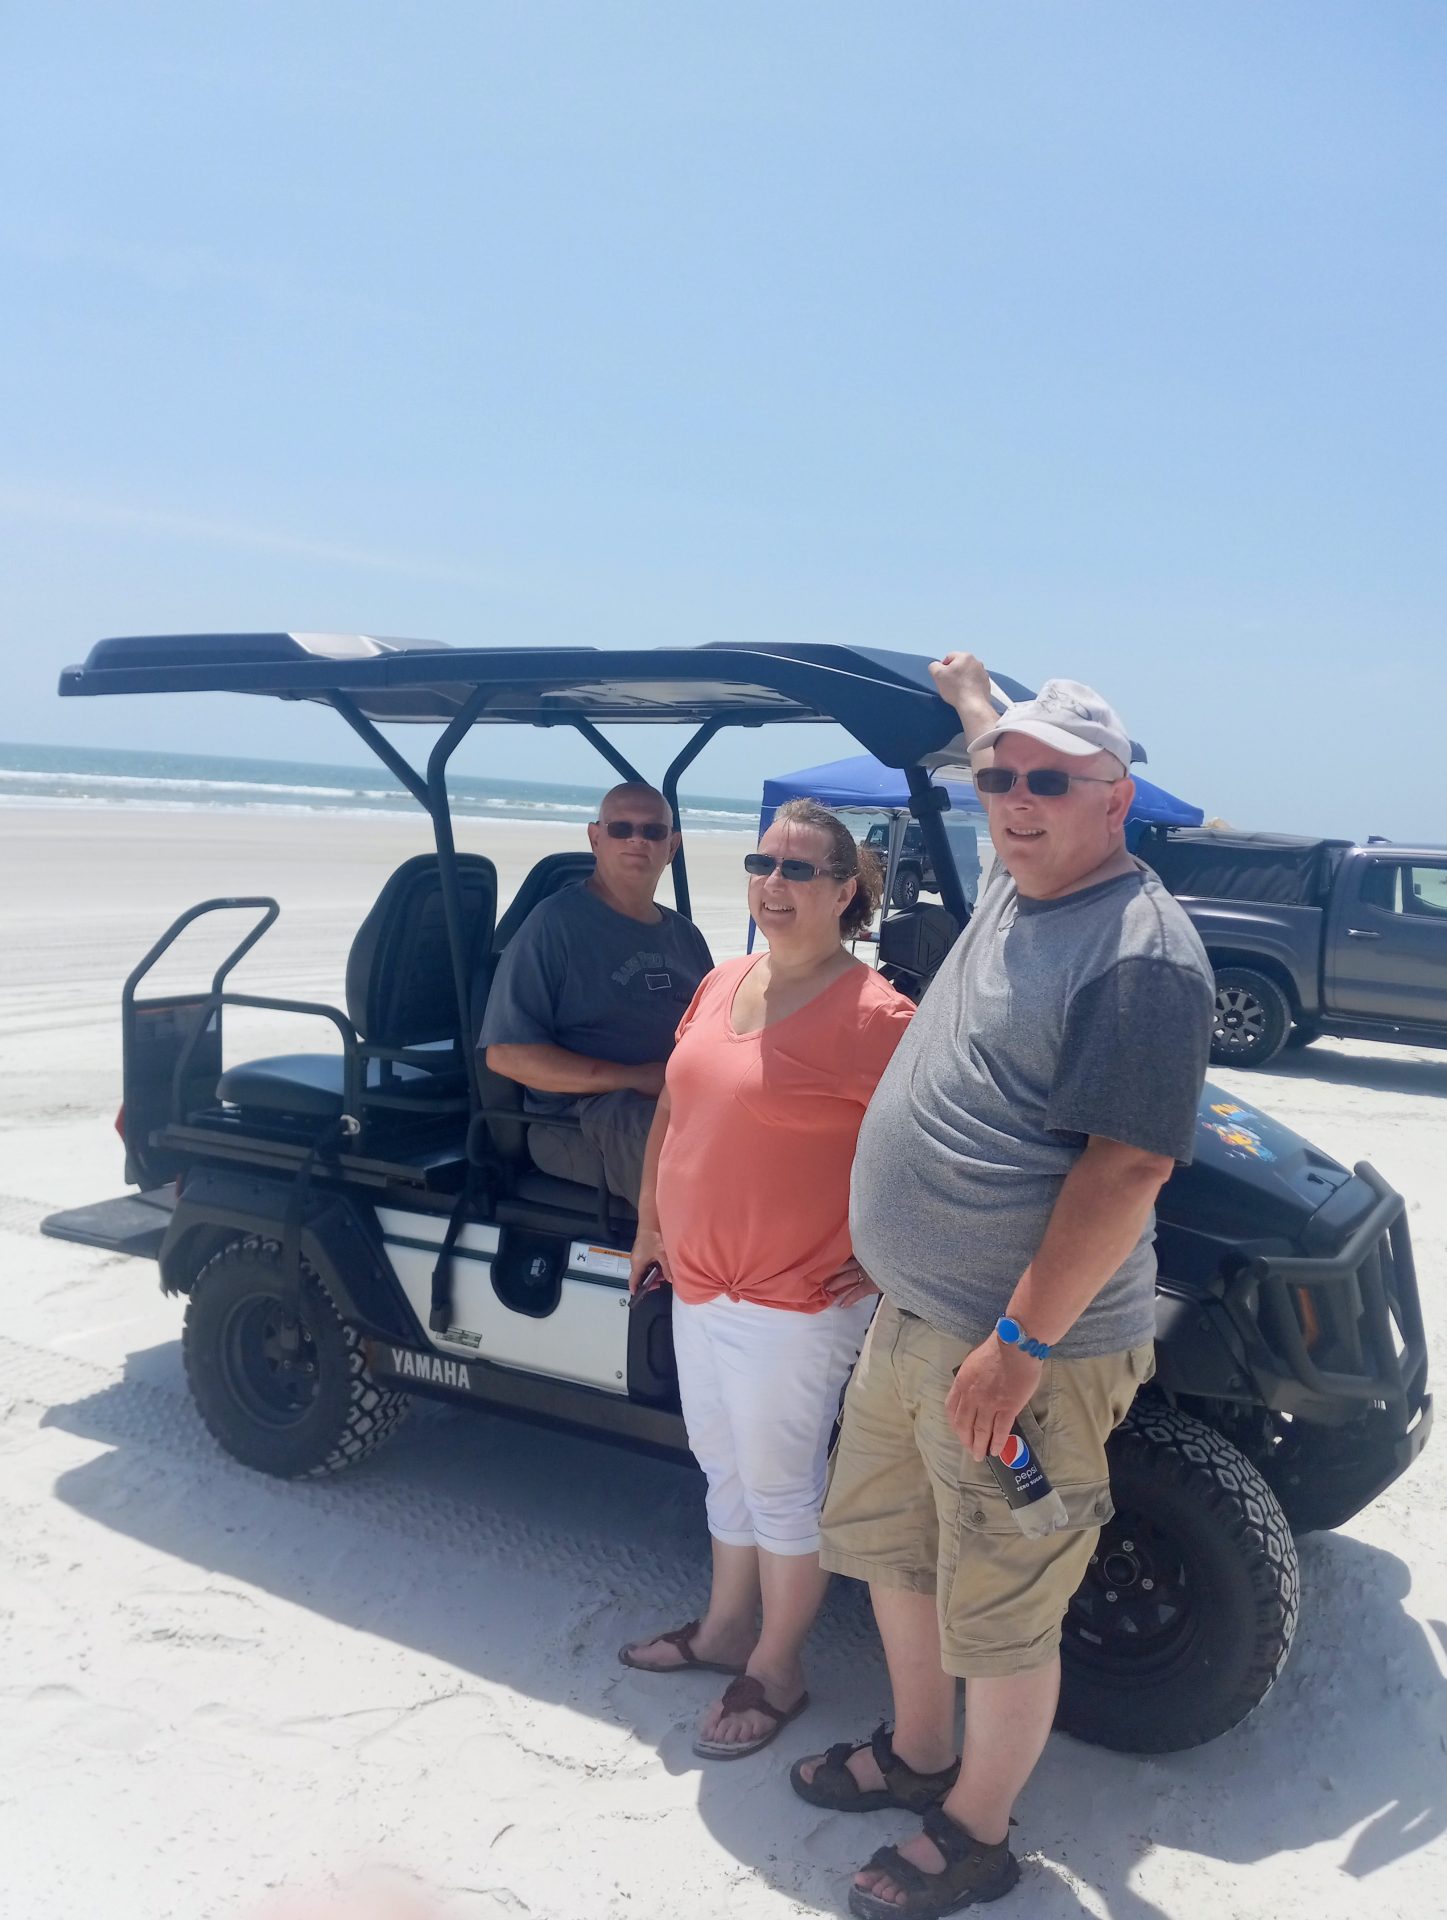 Had fun riding our rented golf cart on New Smyrna Beach with brother Randy and wife Mary.